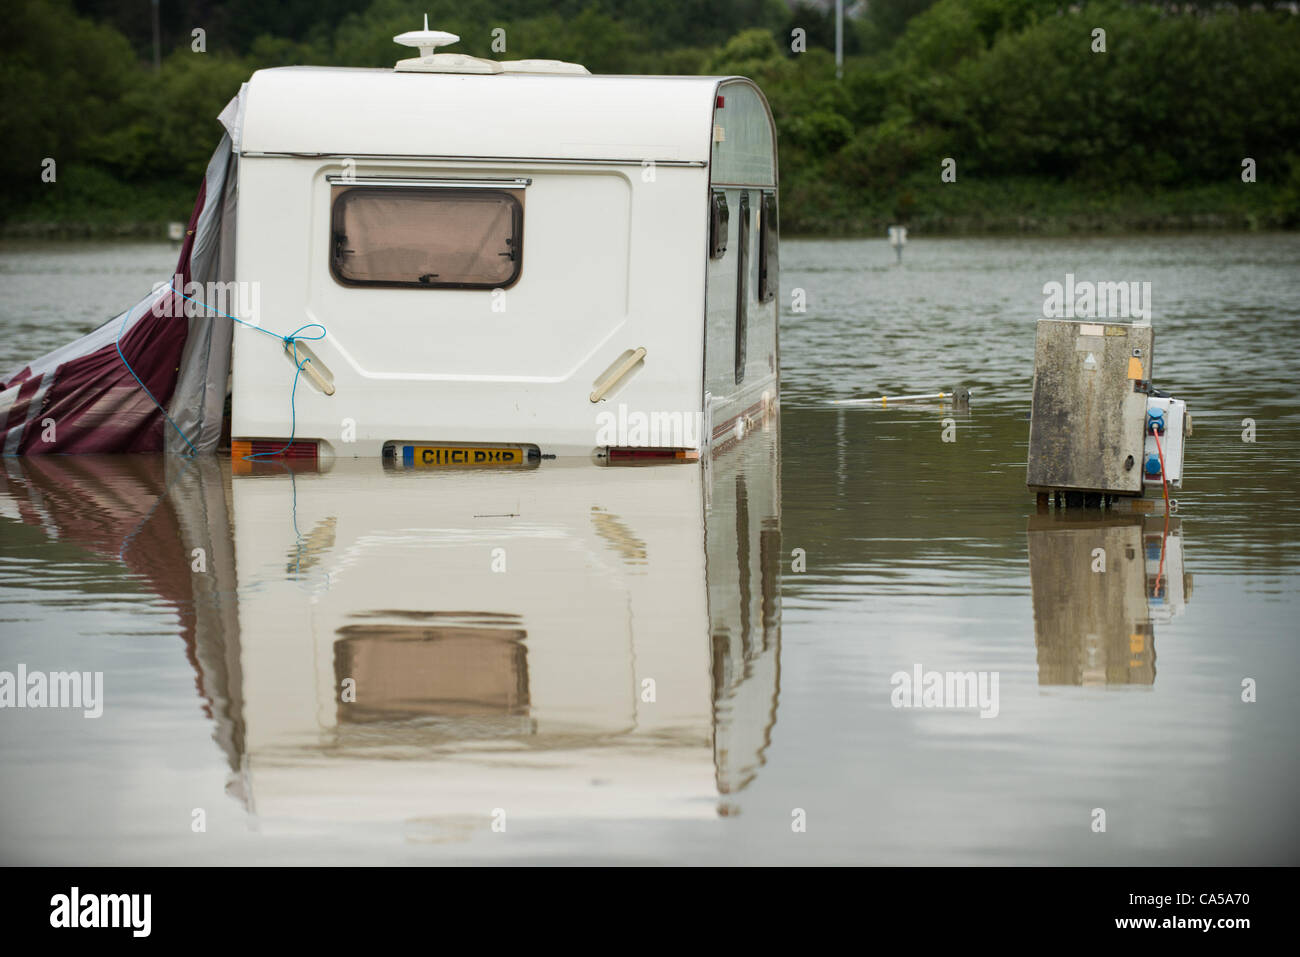 Sunday 10 June 2012. Aberystwyth Holiday Village following the flash floods that hit the Aberystwyth area on Saturday 9 June 2012.  The River Rheidol which flows along the edge of the site burst it banks and flooded the campsite following two days of torrential rain photo ©keith morris Stock Photo